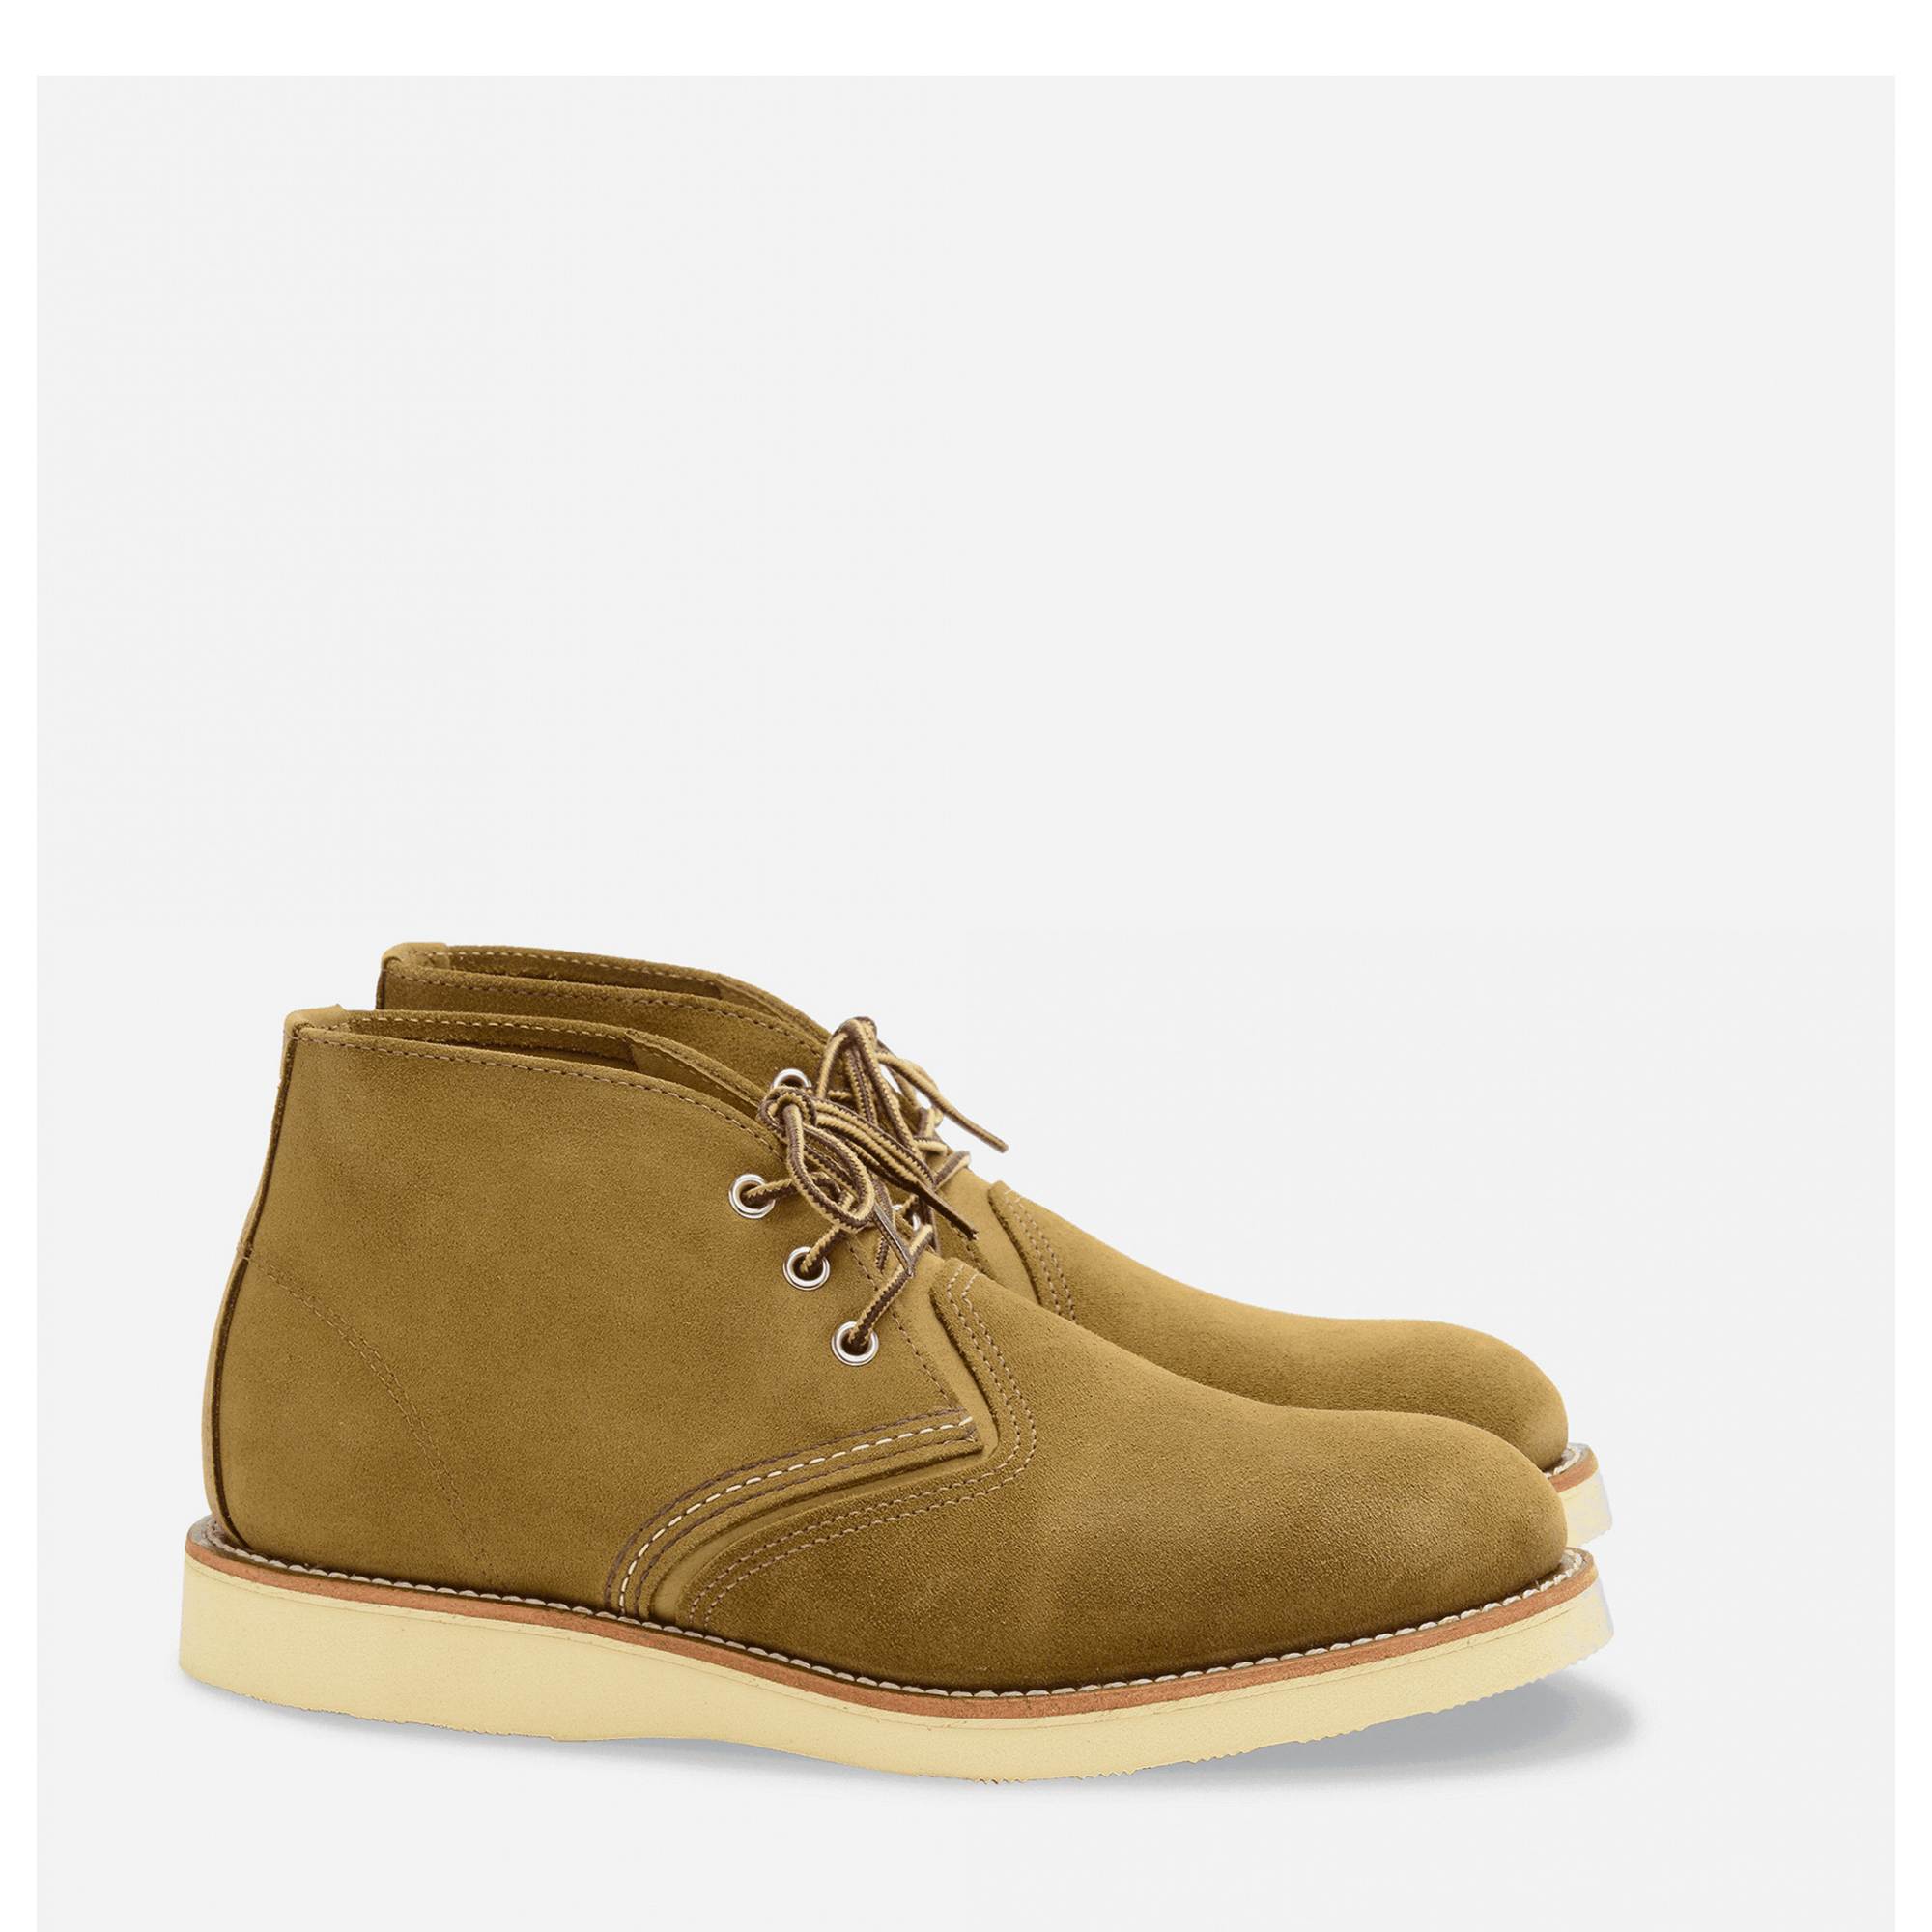 red-wing-shoes-chukka-3149-olive-mohave-royalcheese-royalcheese